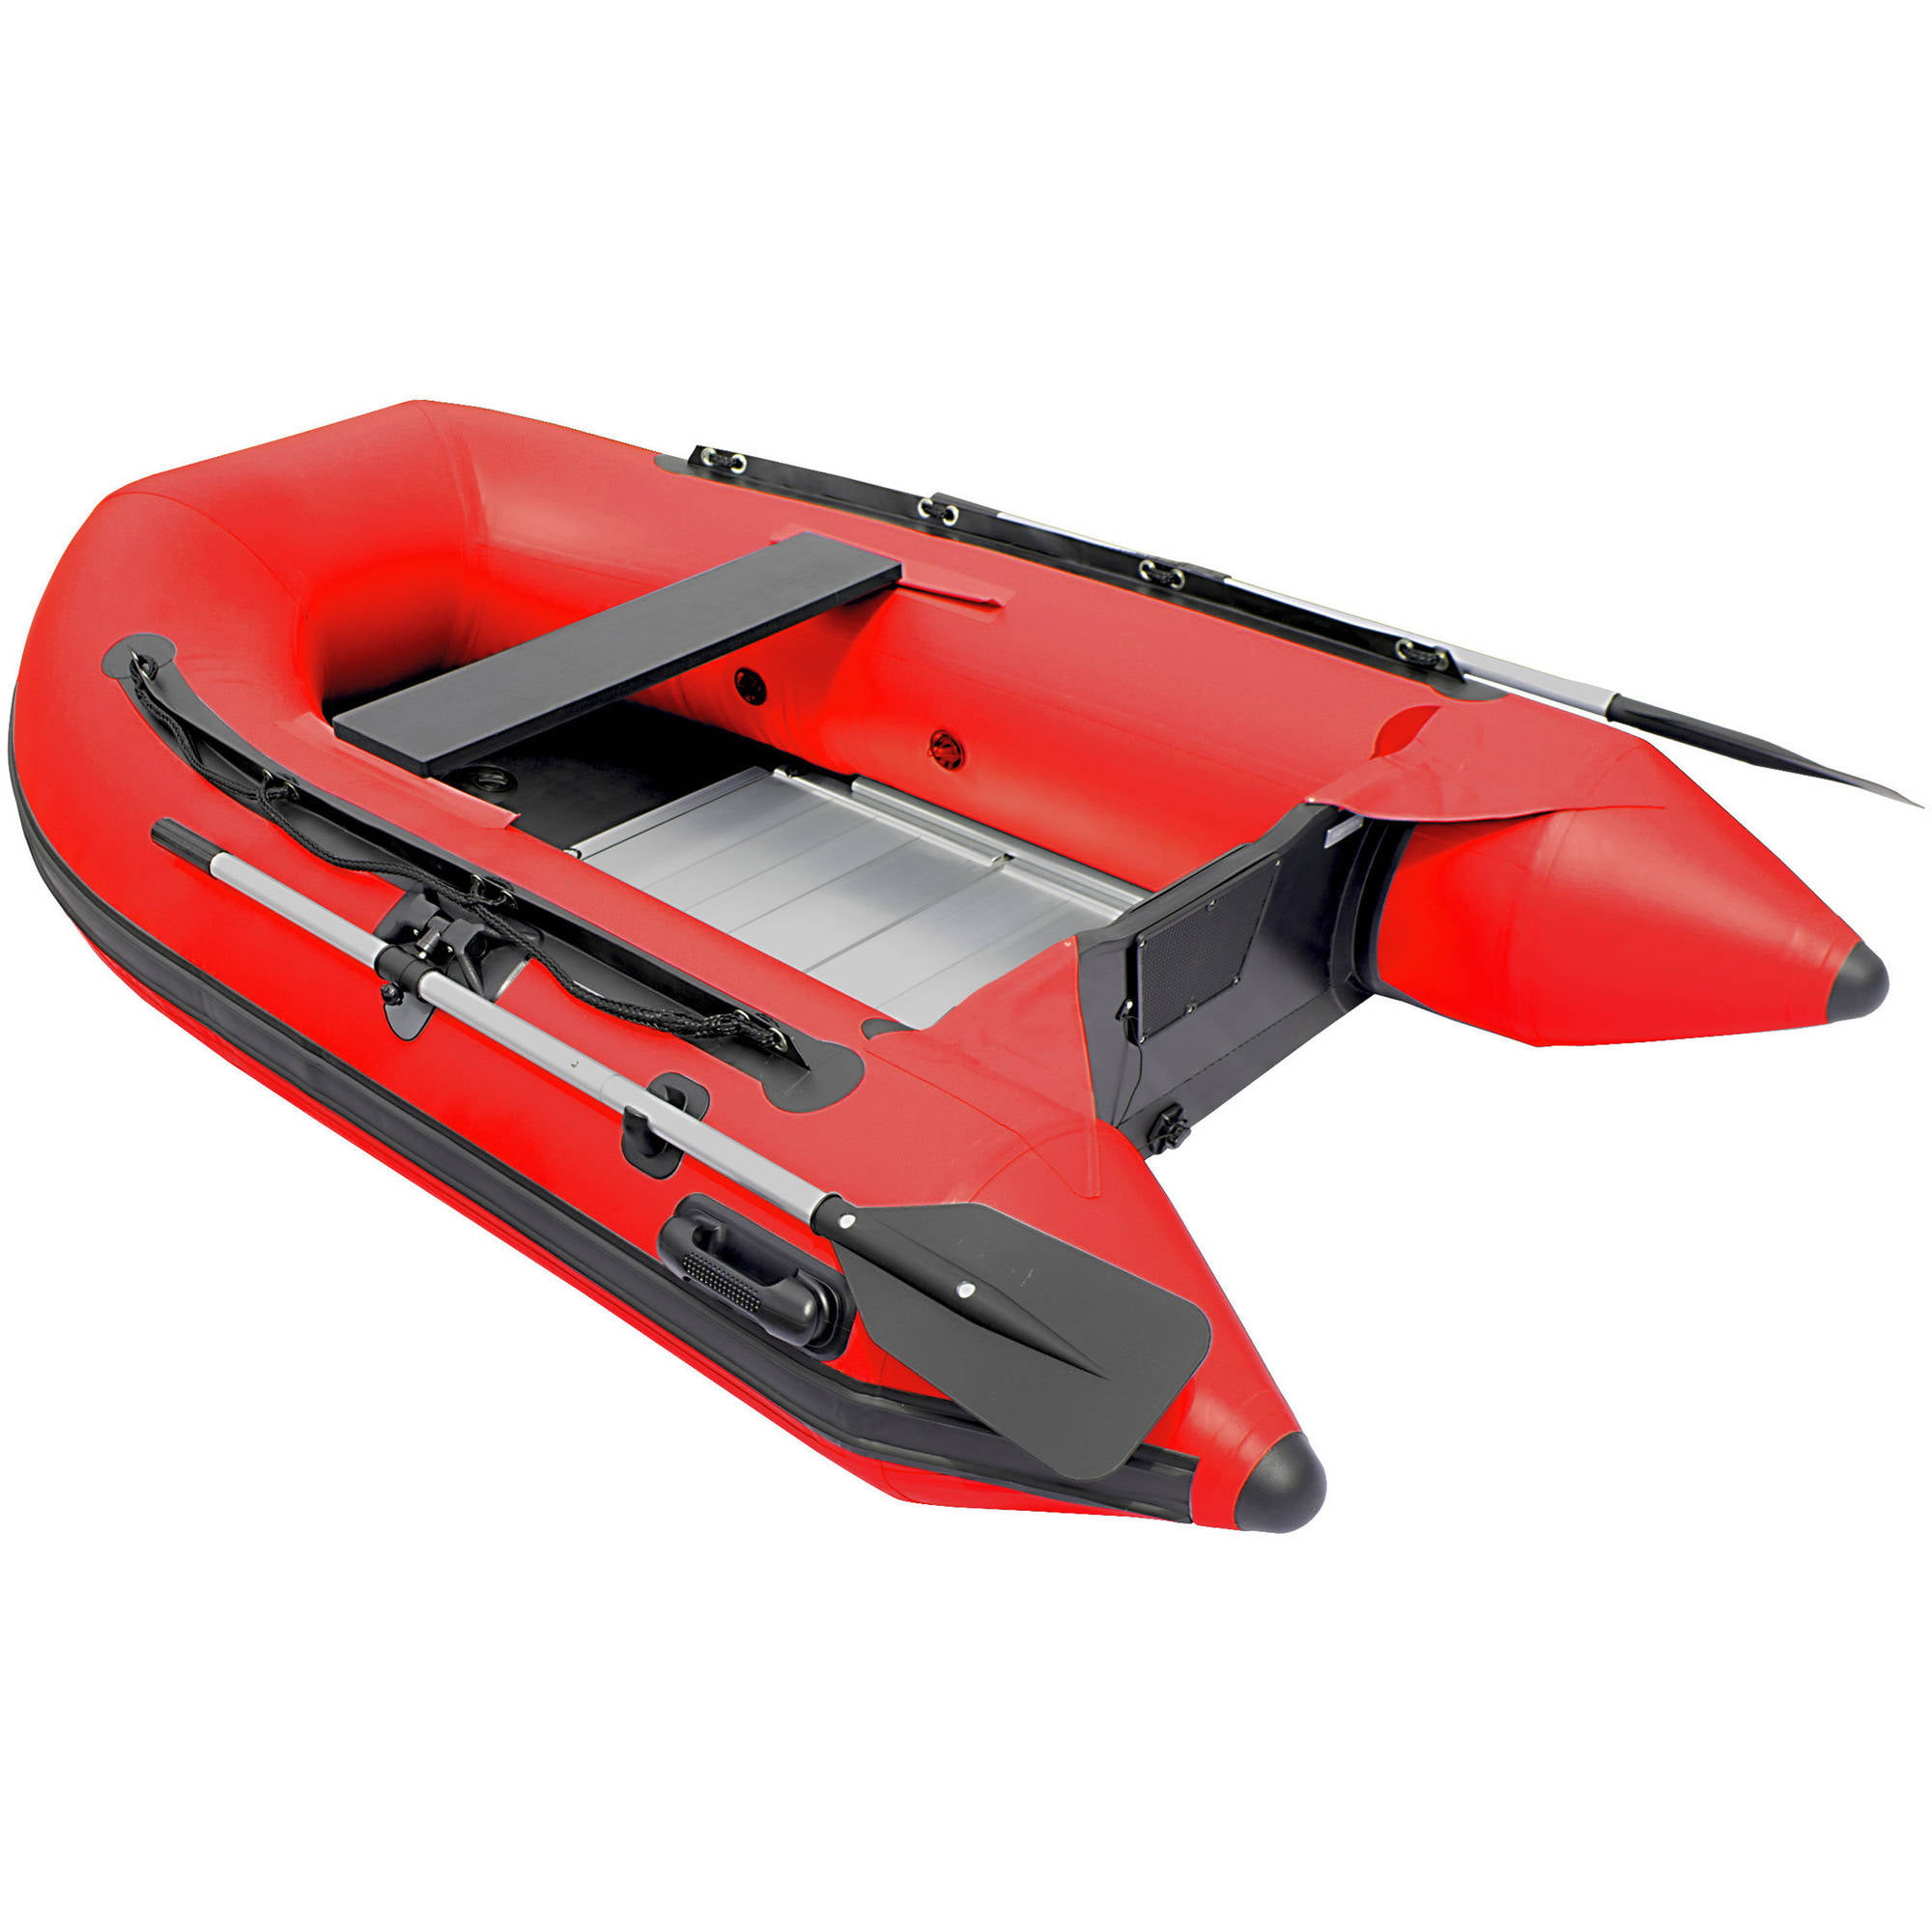 Details about   Inflatable Boat Transom Launching Wheel For Inflatable Dinghy Yacht Tender raft 